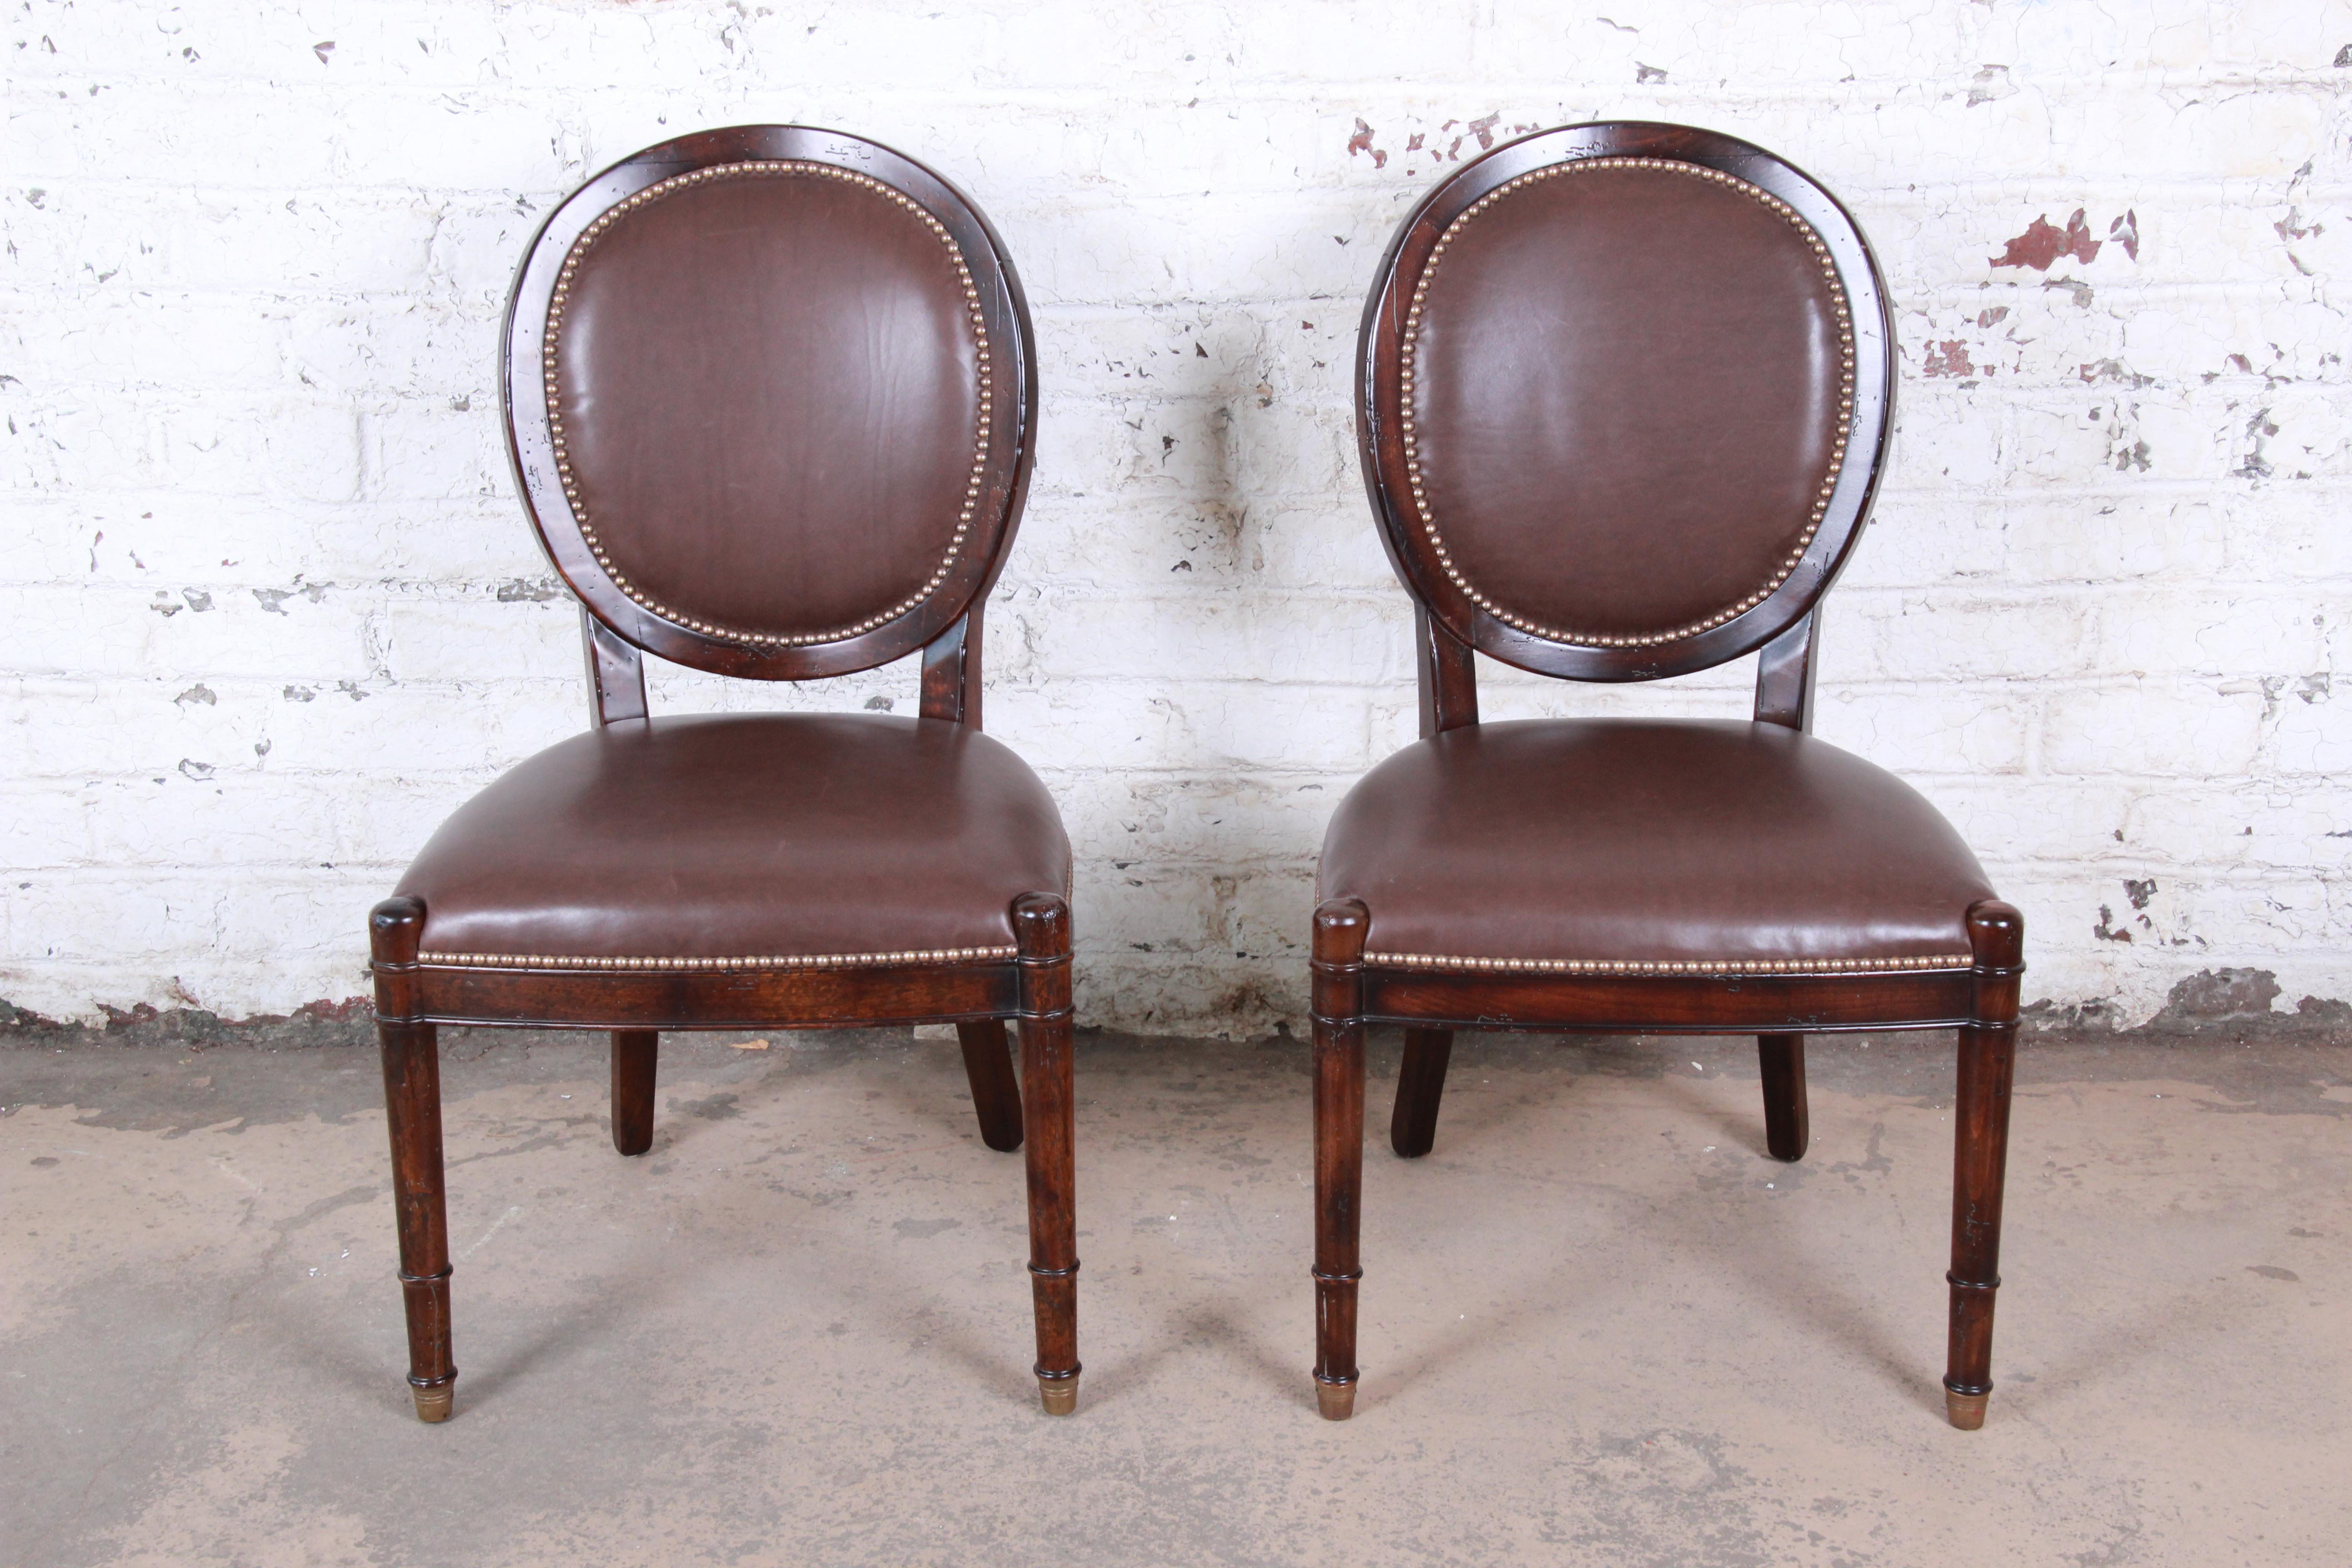 A gorgeous pair of balloon back side chairs from the Milling Road line by Baker Furniture. The chairs features solid walnut frames with brass-tipped feet and high-end studded brown leather upholstery. The original labels are present on the underside